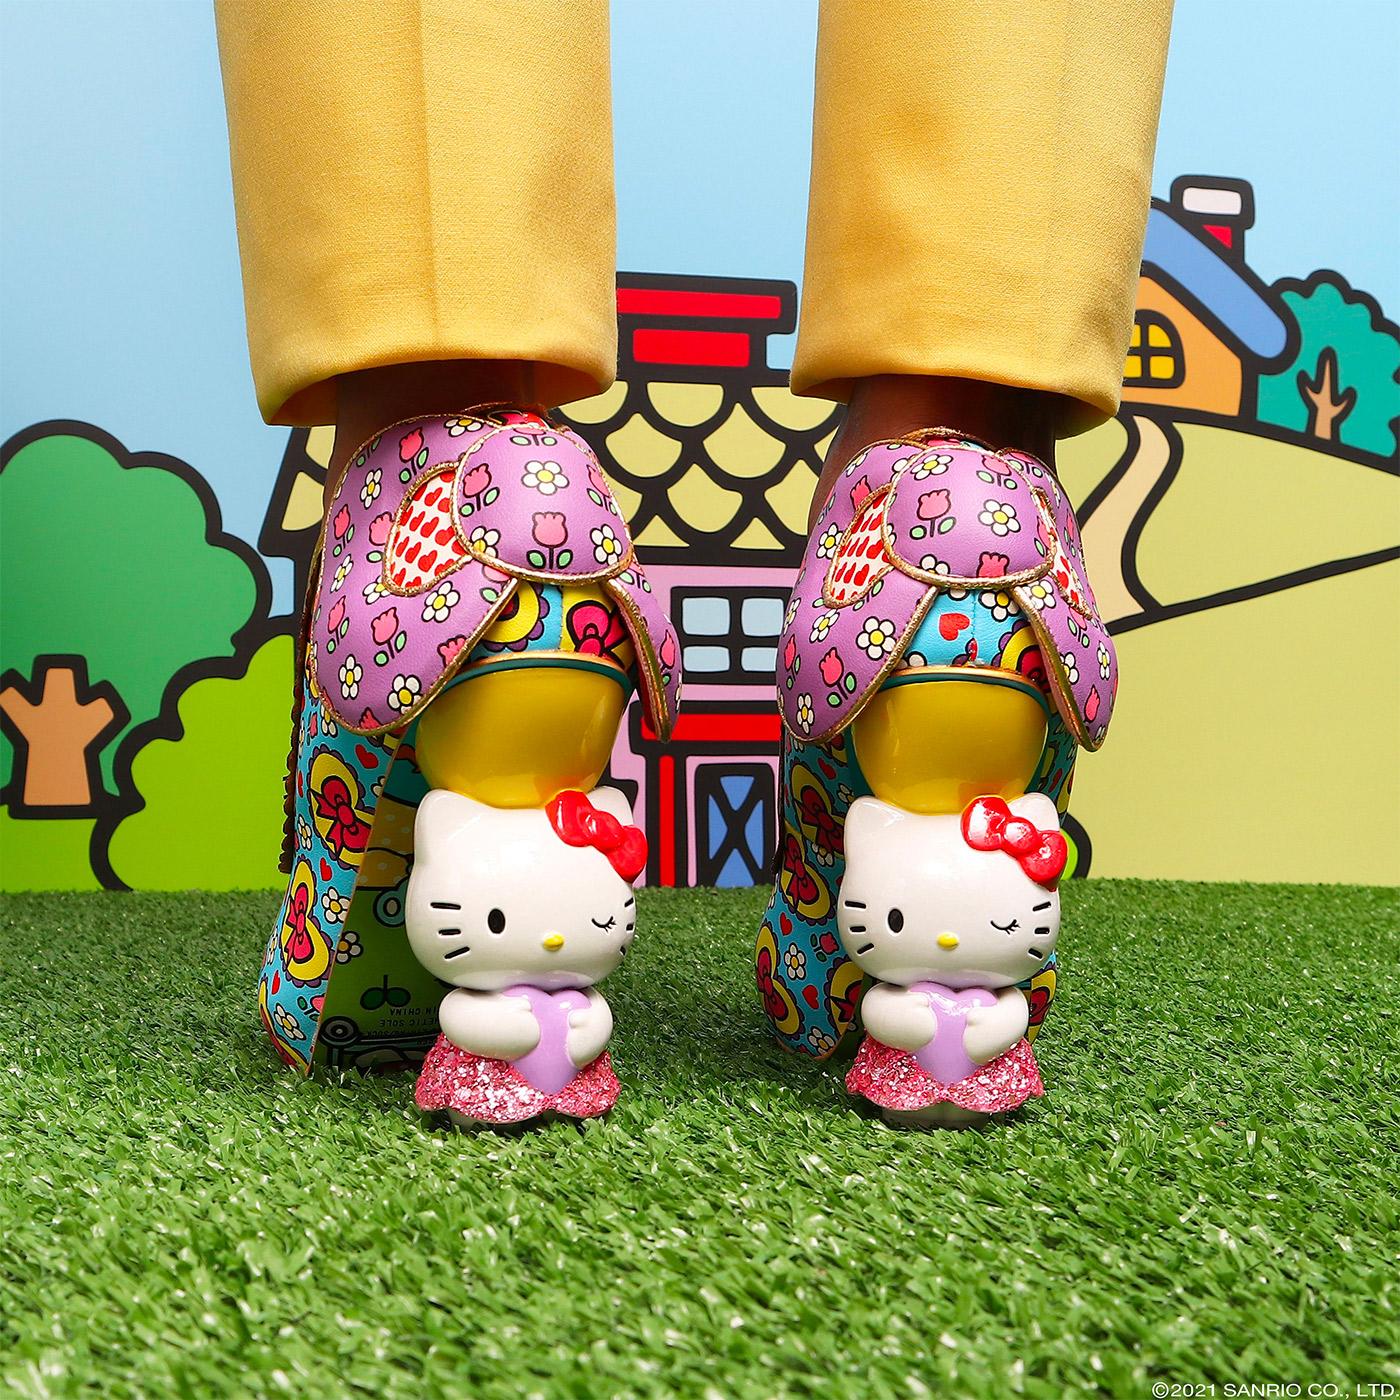 Star of the Show Heels from the Hello Kitty and Friends x